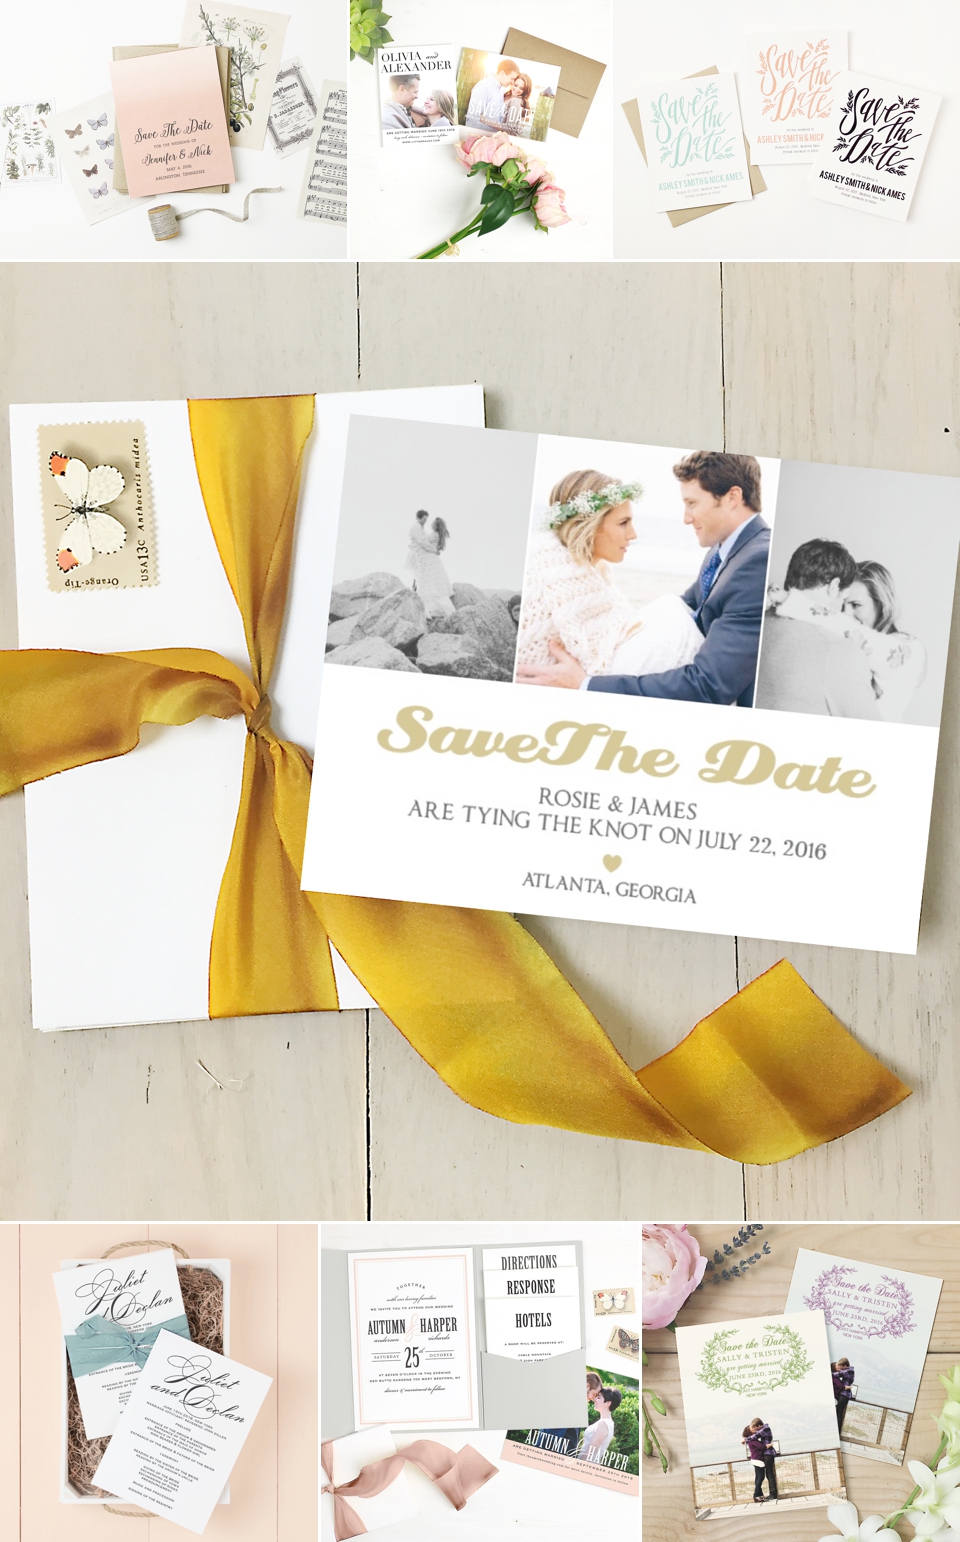 Basic Invites, Paper goods, wedding invitations, baby shower, save the dates, party goods